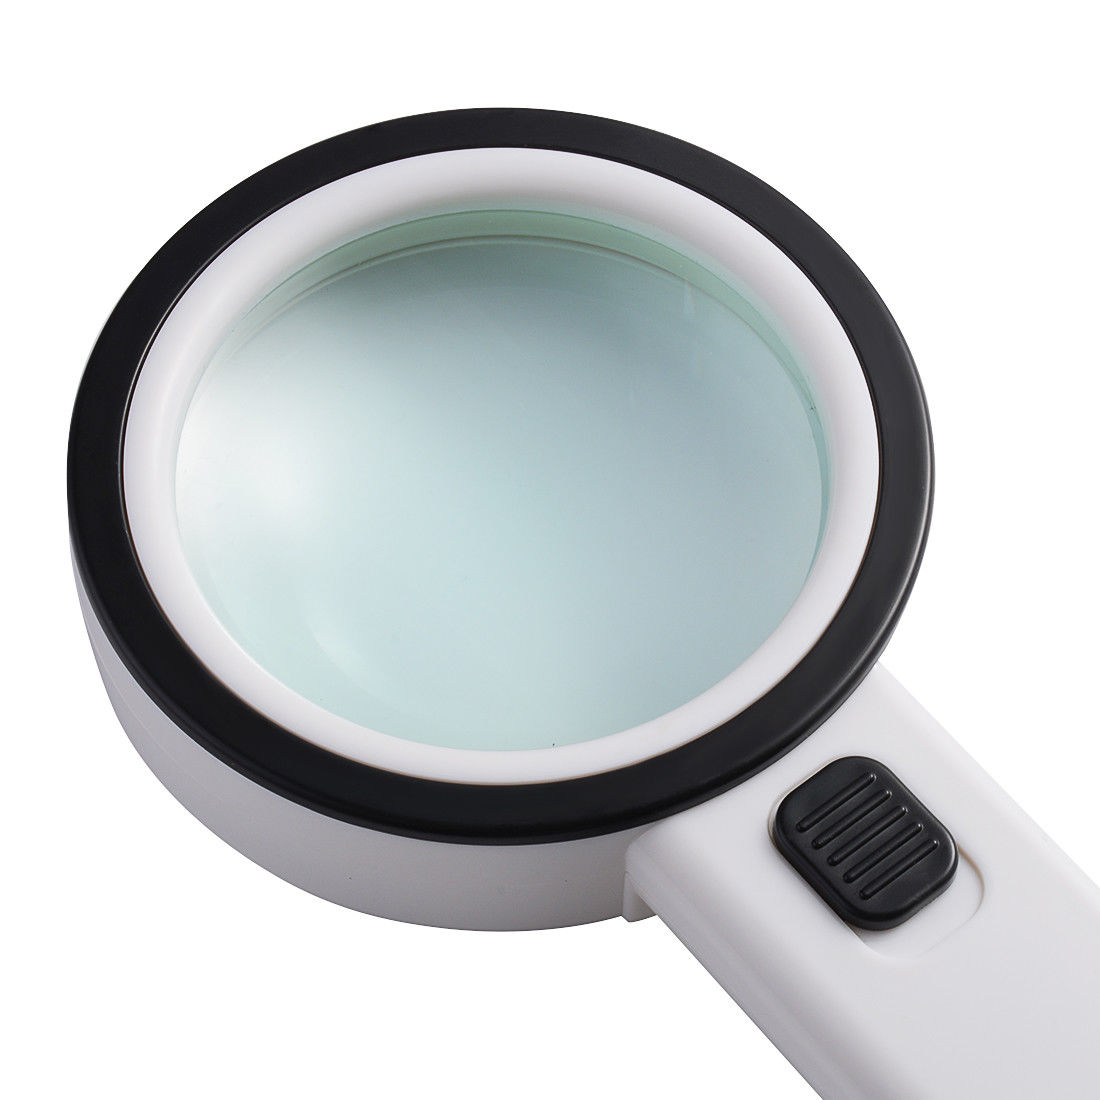 New 105mm Handheld 20x Magnifying Glass Lens Magnifier With 12 Led Lights 607111027089 Ebay